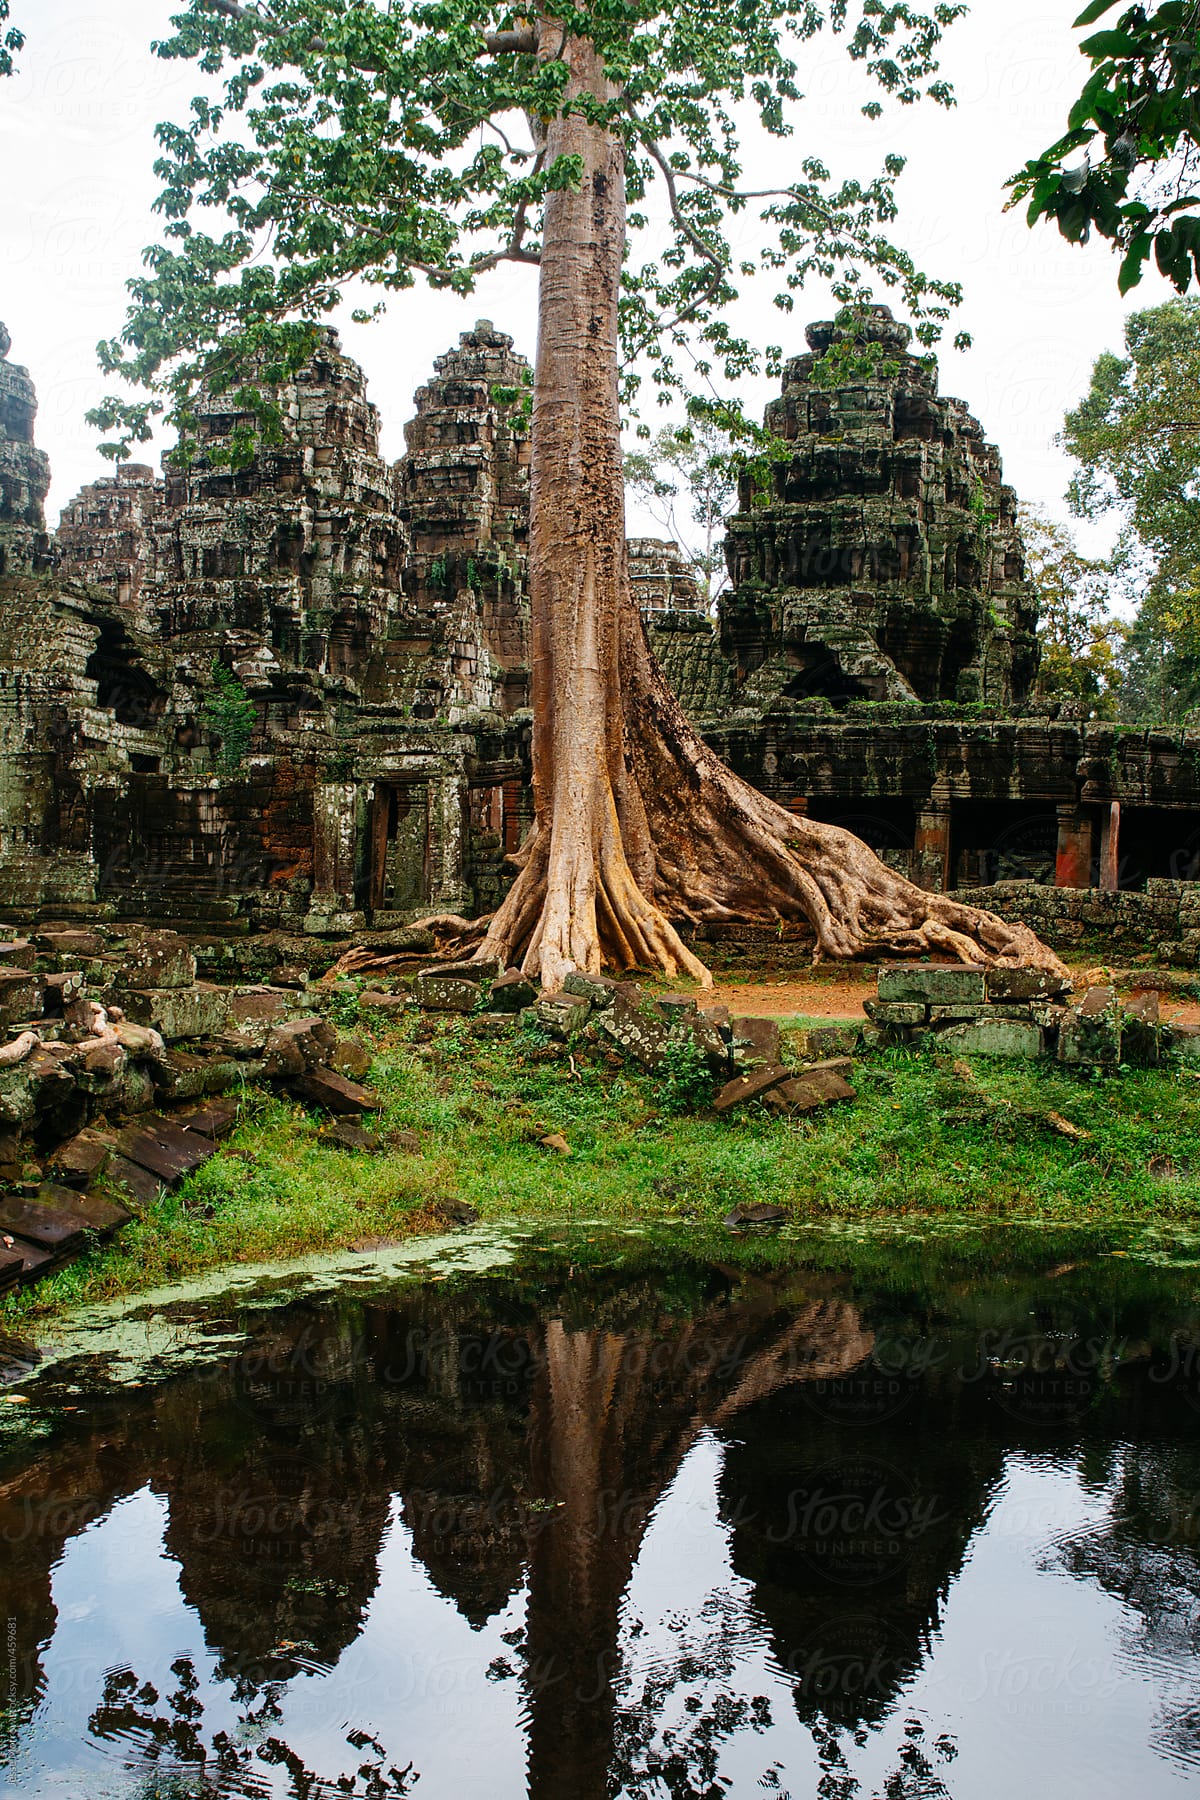 Overgrown tree and root system next to ancient temple